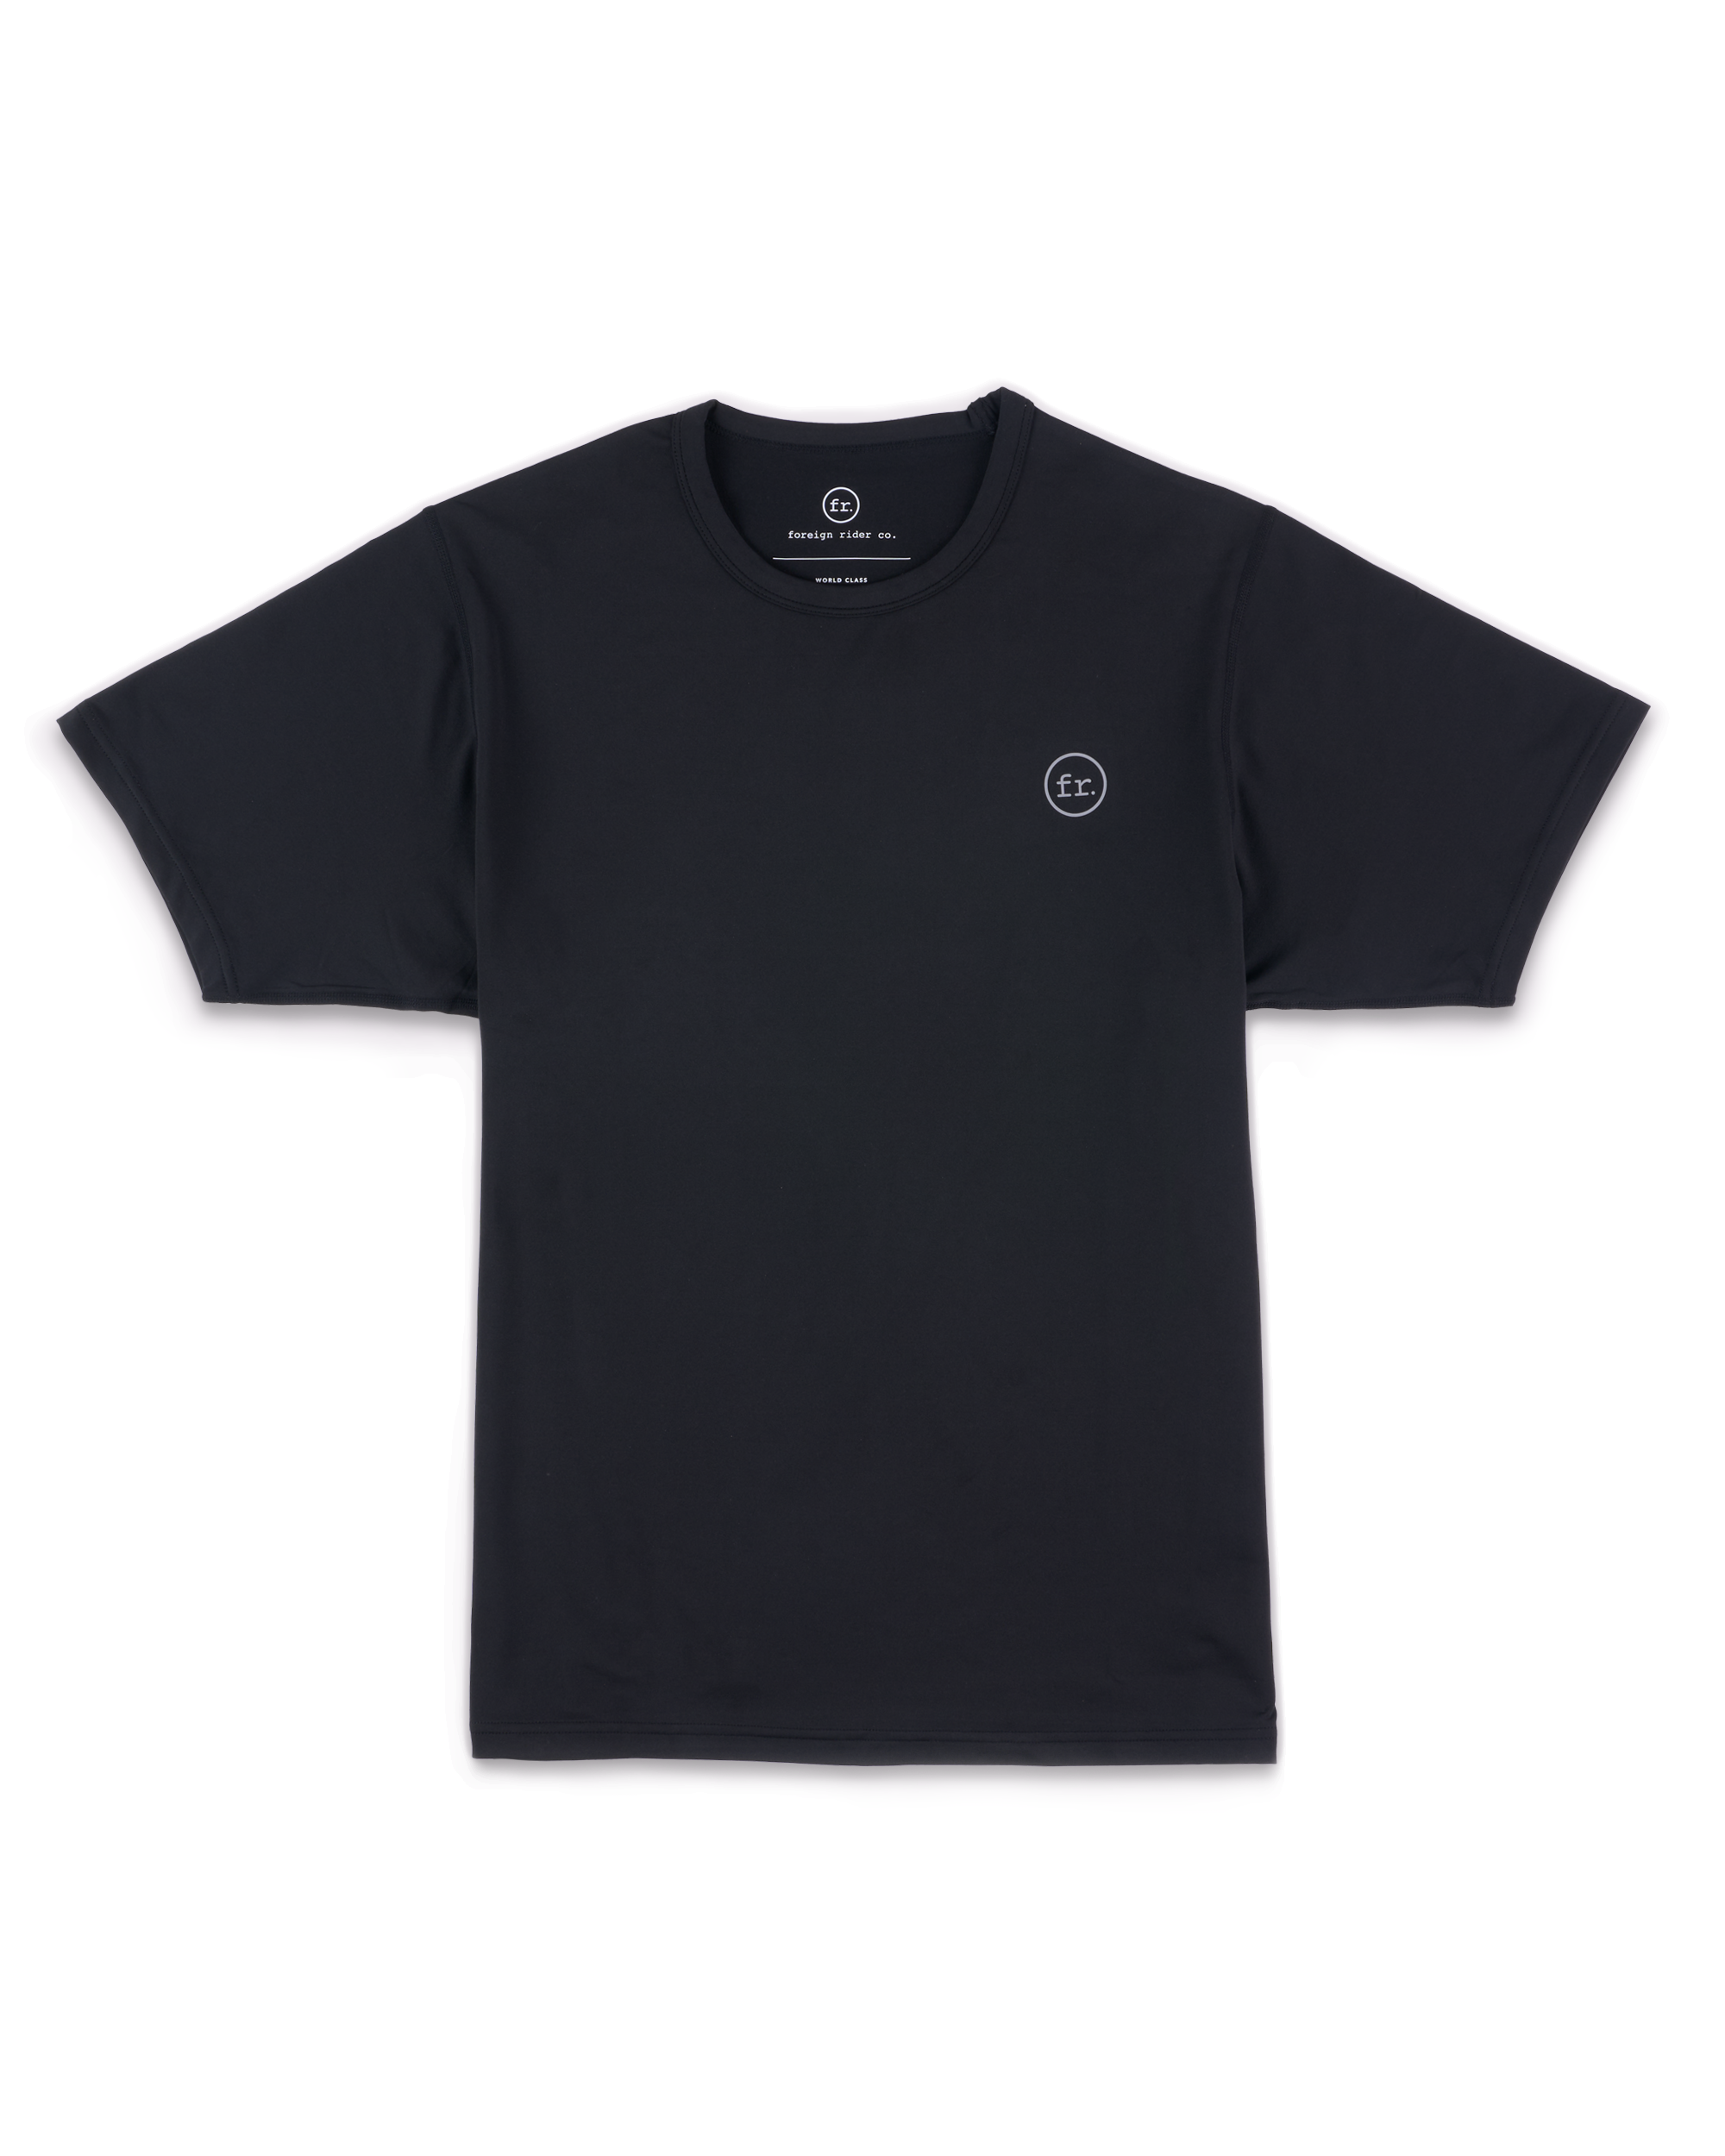 FR performance SS T-shirt black - Foreign Rider Co.